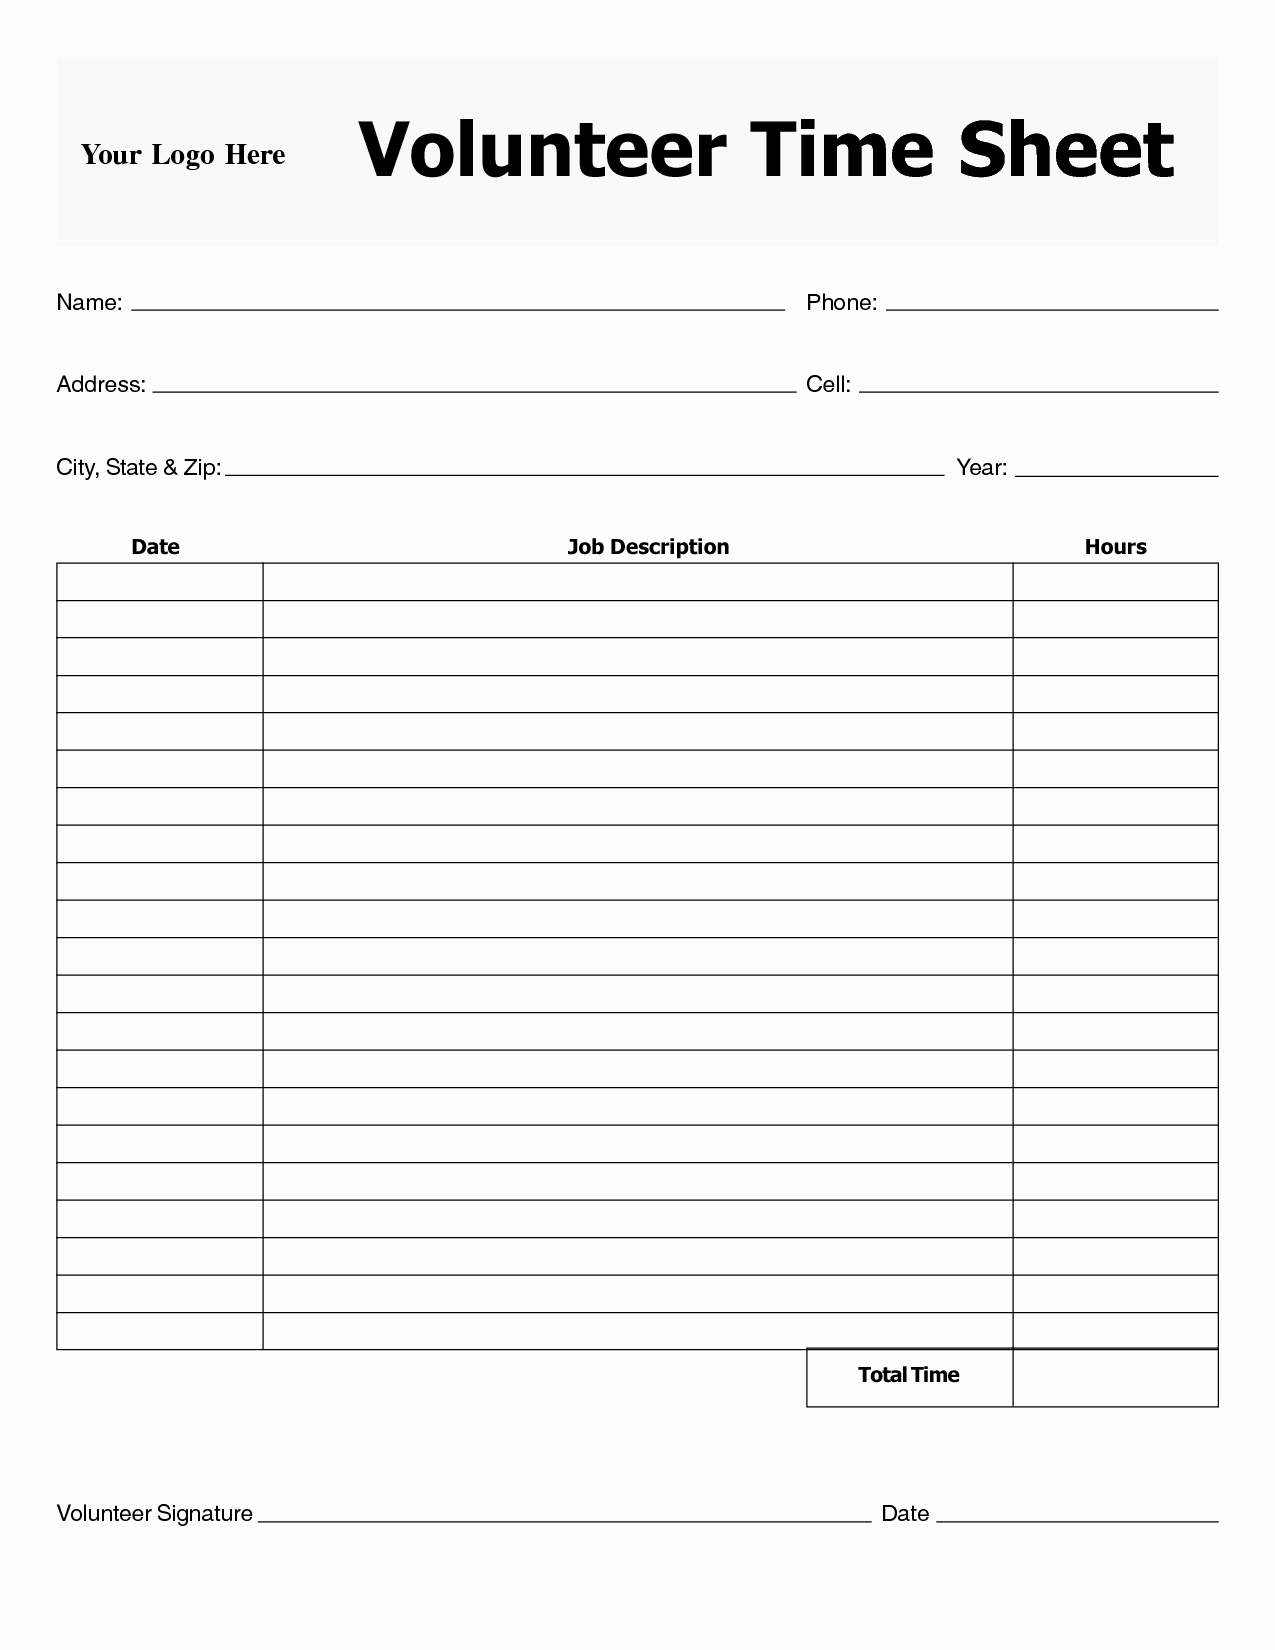 Tracking Volunteer Hours Template New Best S Of Time Spreadsheet Template Time Sign Up